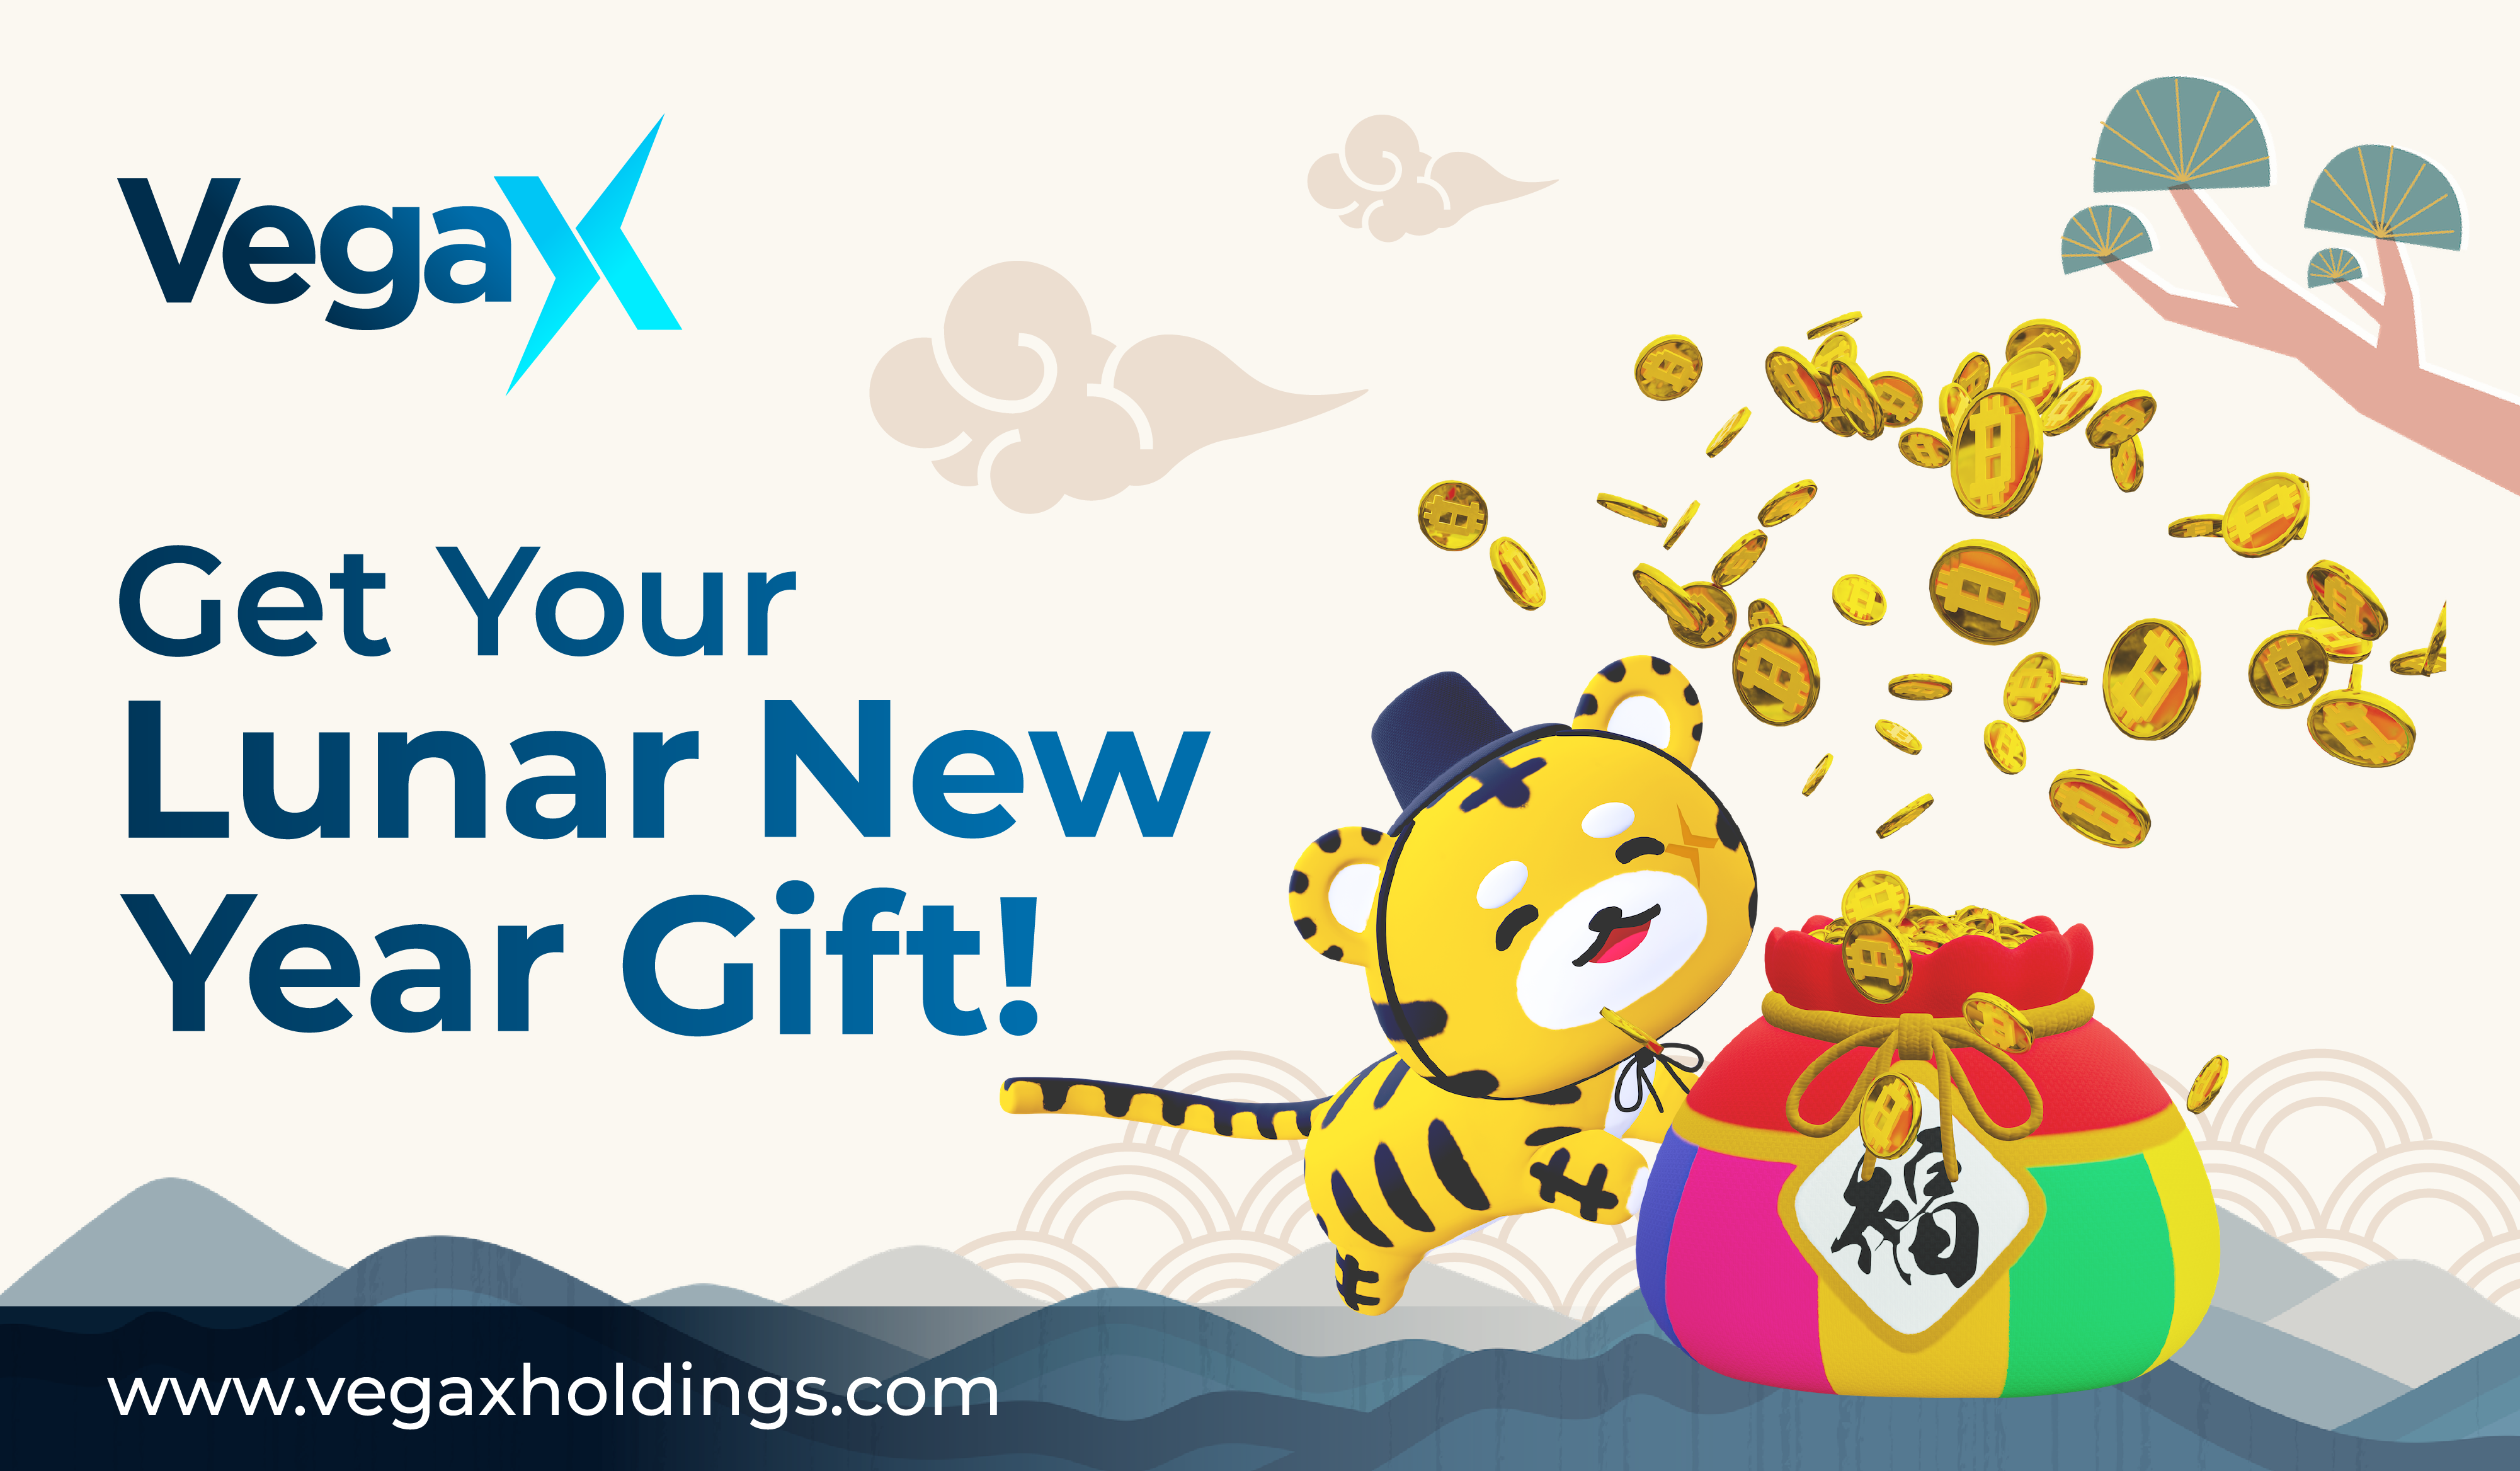 VegaX Gifts Bitcoin to New Users to Celebrate Year of the Tiger